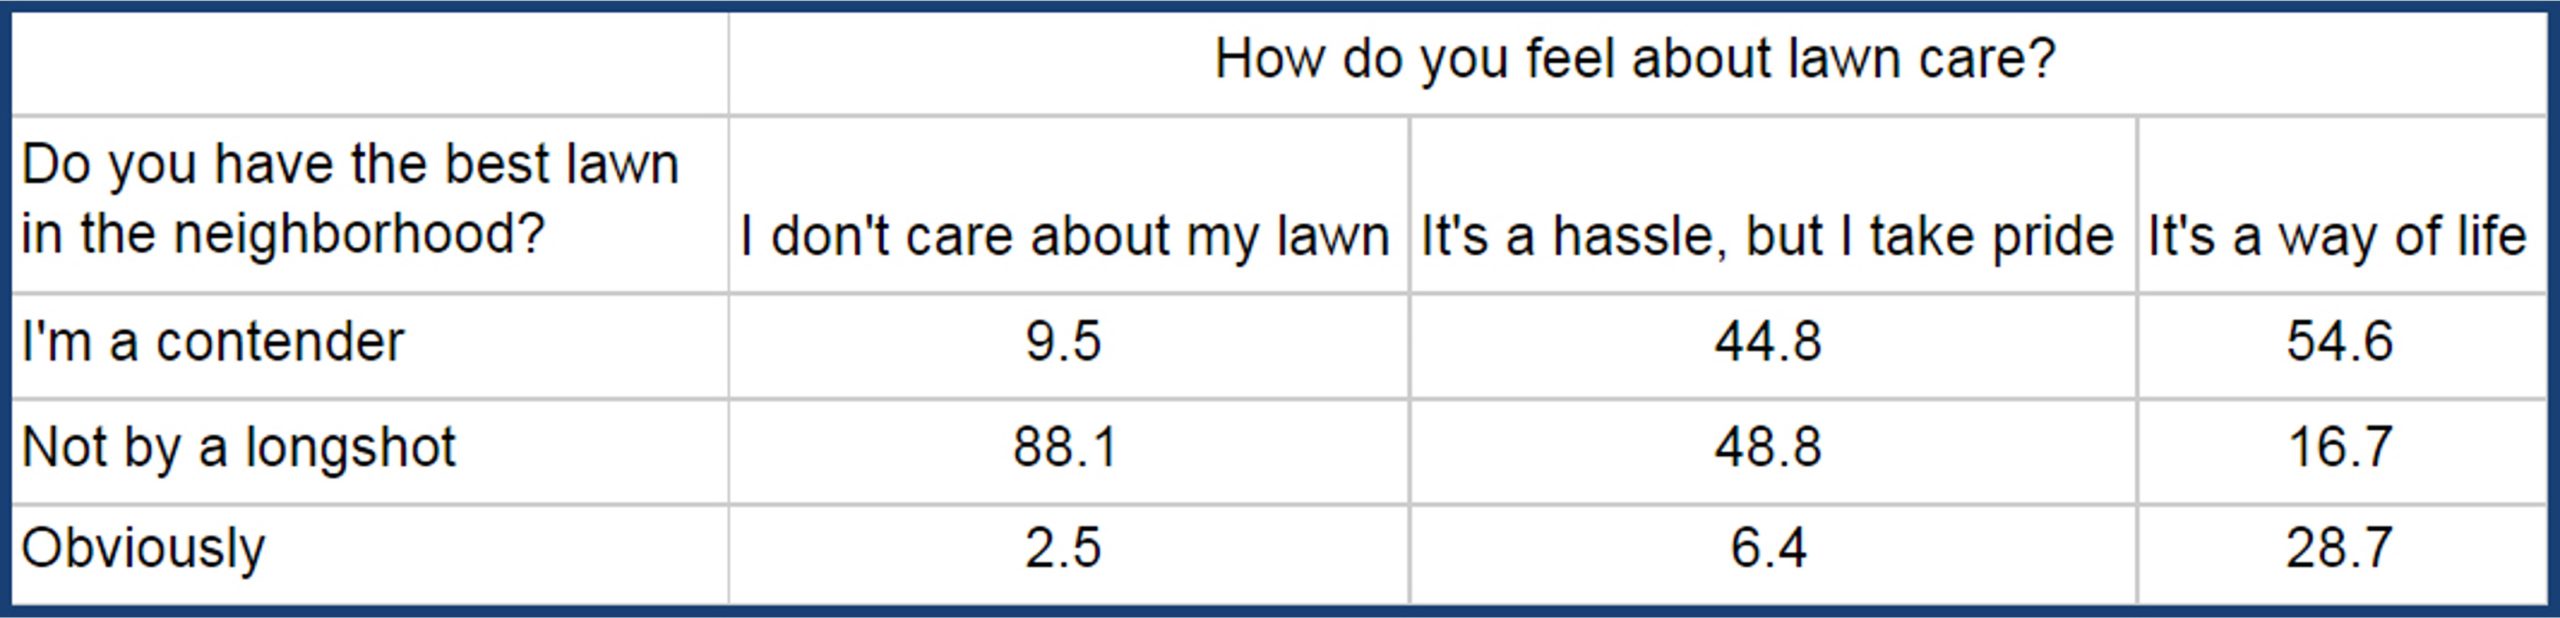 how do you feel about lawn care? survey results chart